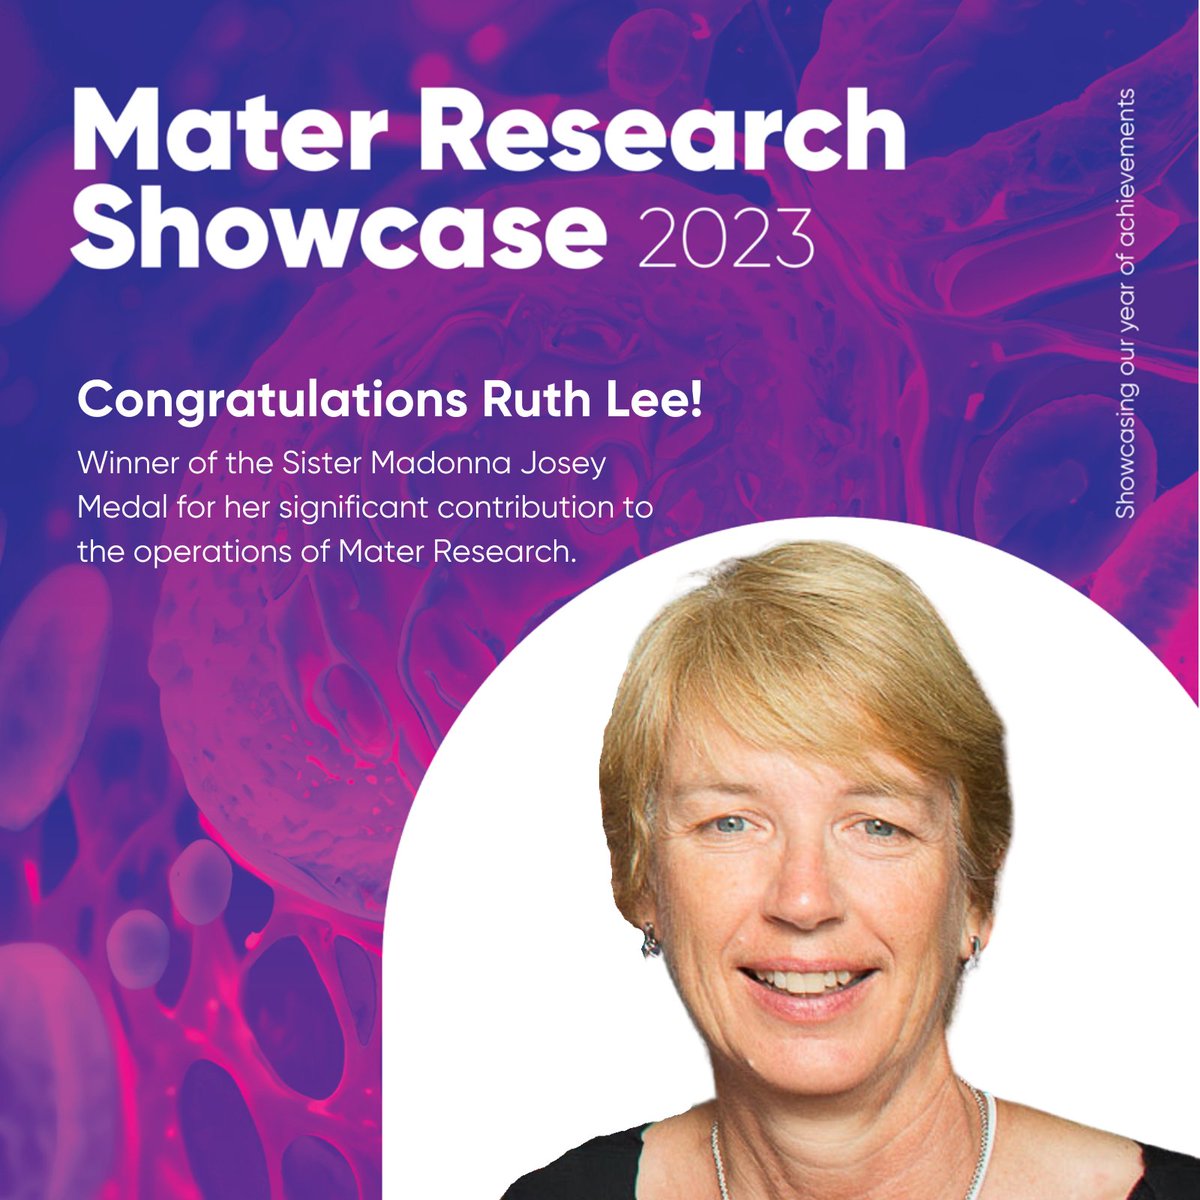 Congratulations to Ruth Lee, winner of the Sister Madonna Josey Medal. This medal is awarded to an individual who has made a significant contribution to the operations of Mater Research. Ruth is a valuable member of the Mater Research Ethics and Governance team.